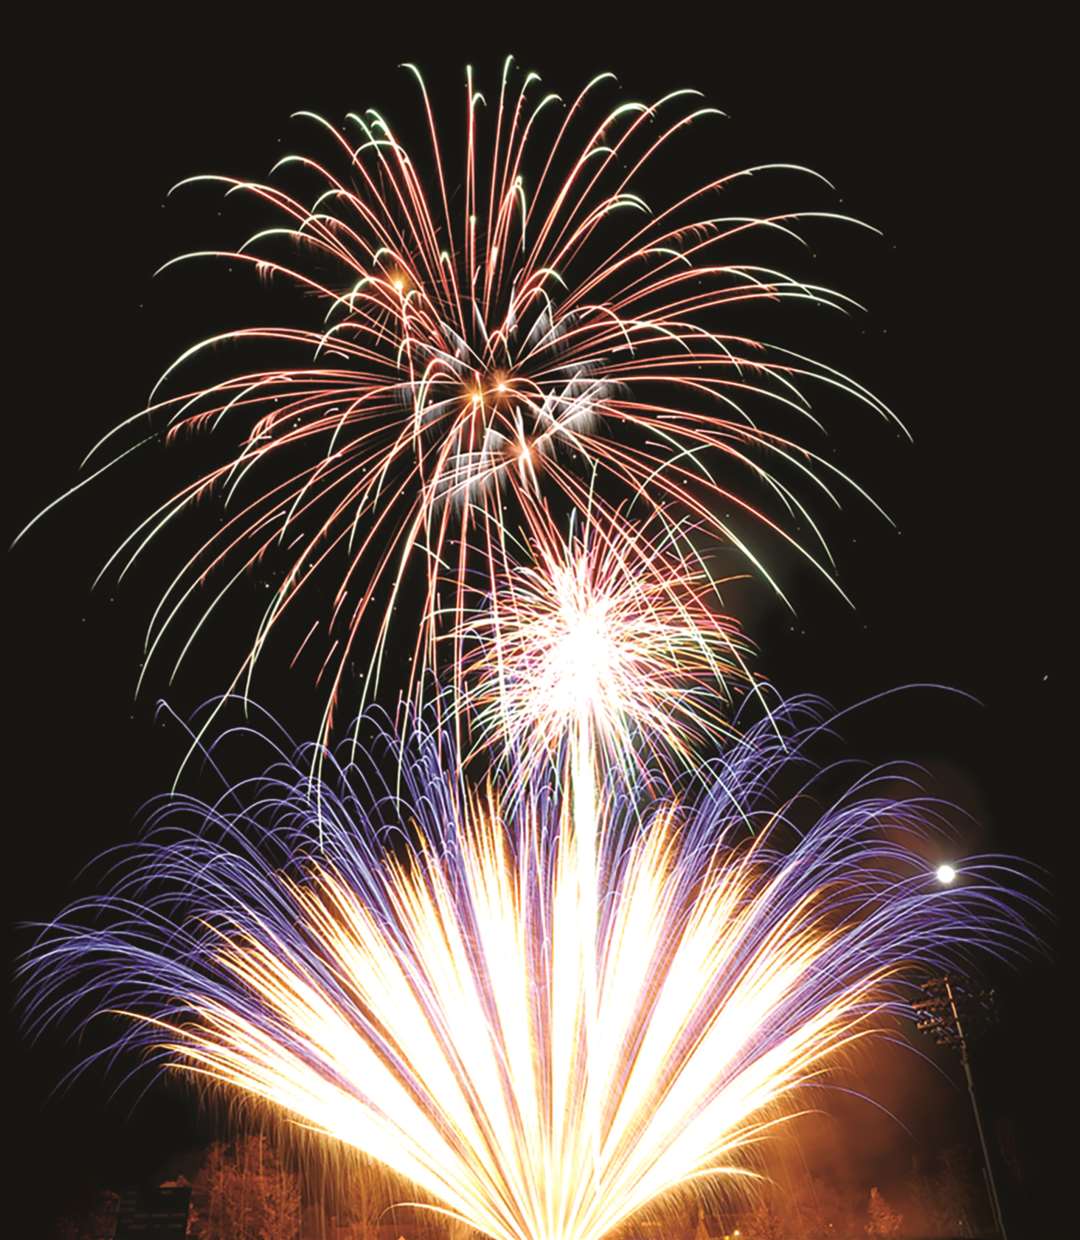 Fireworks will not go ahead at Deal & Betteshanger Rugby Club this year